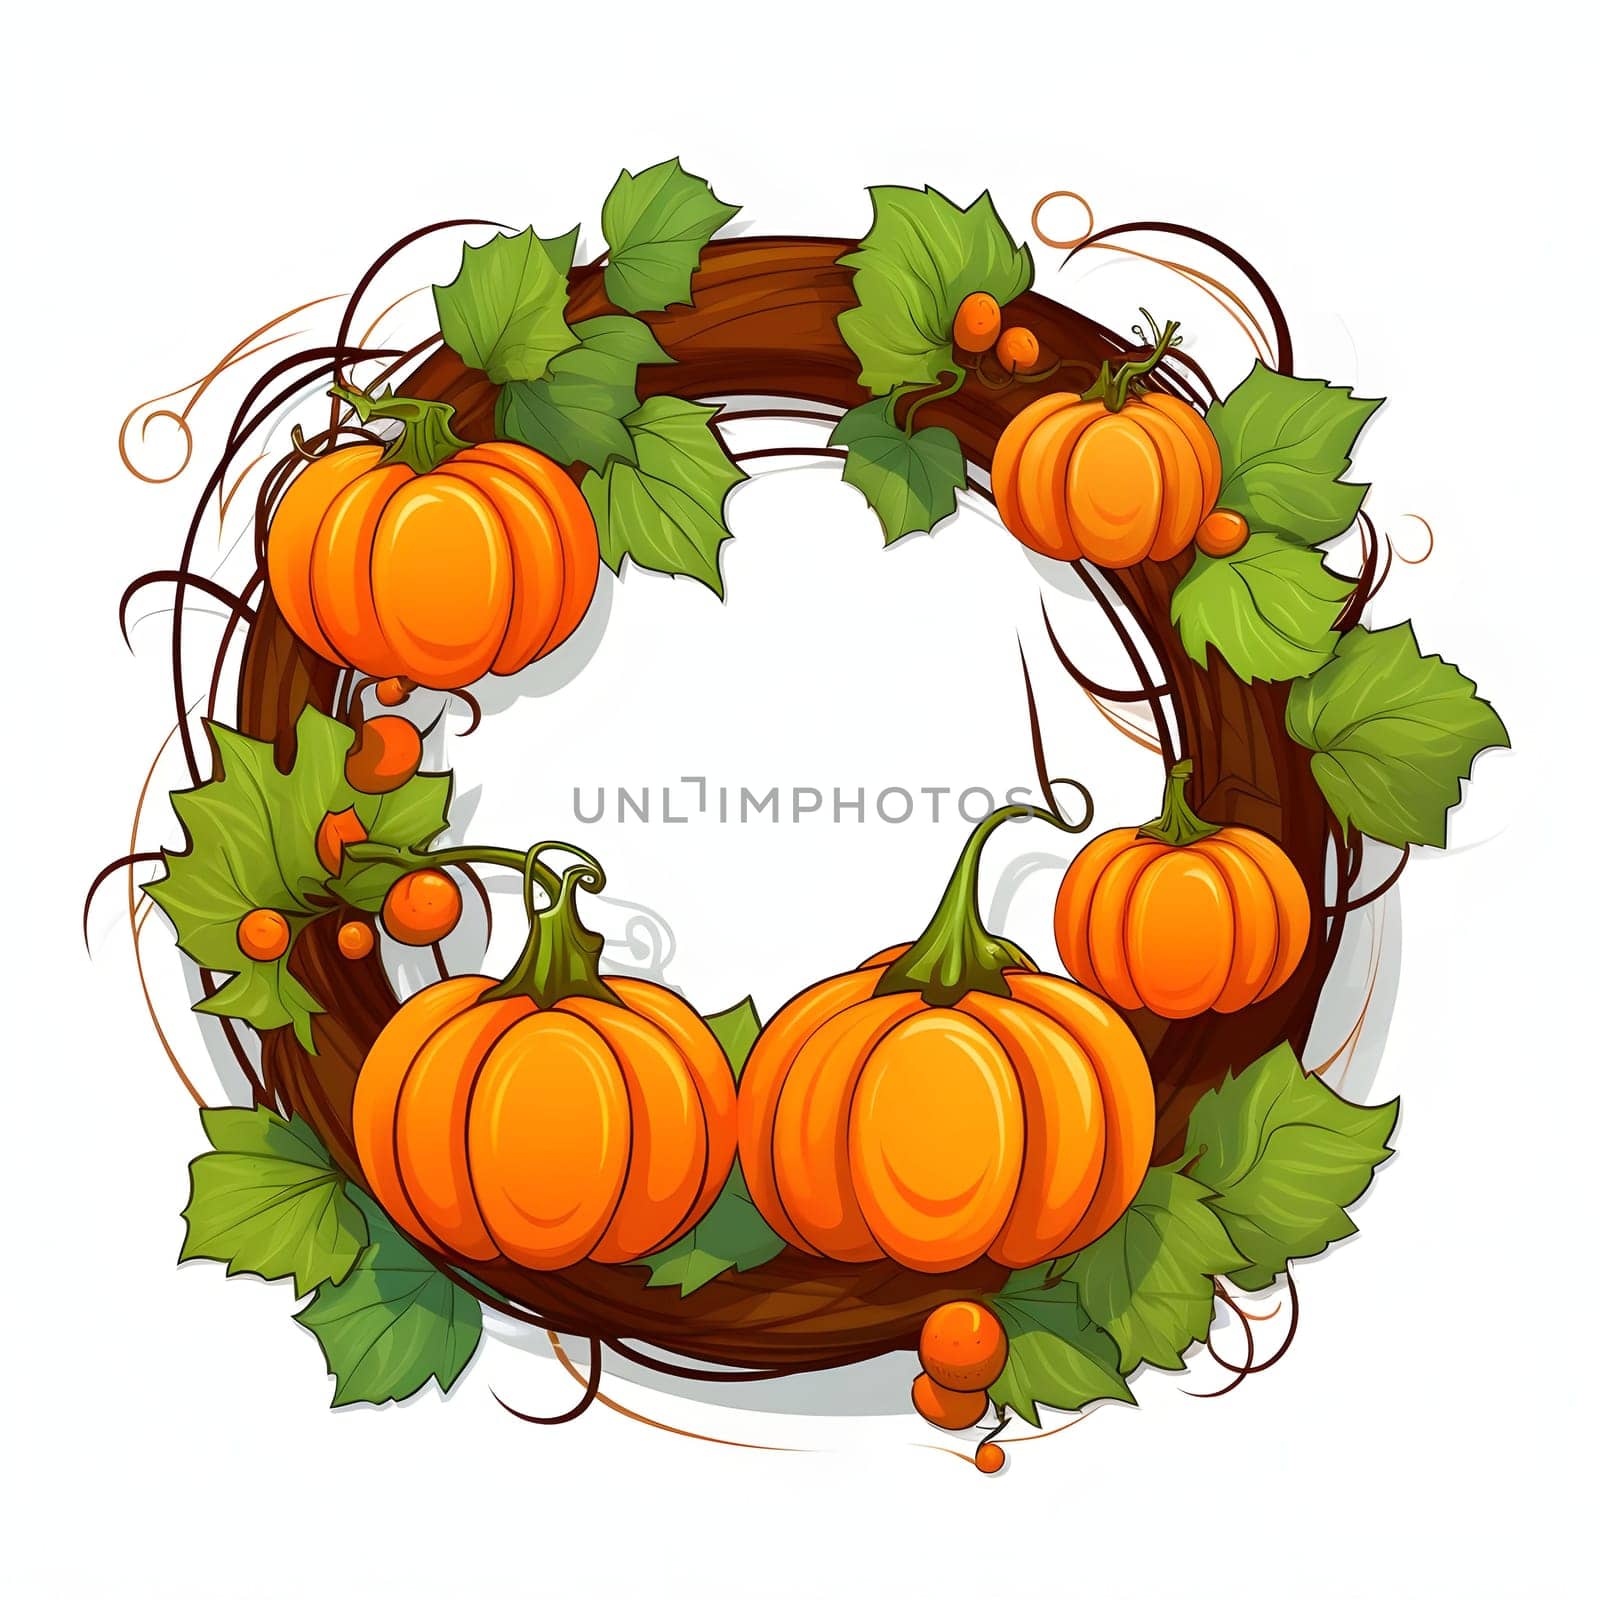 A frame embellished with pumpkins and leaves against a light background forms an elegant and visually appealing composition.